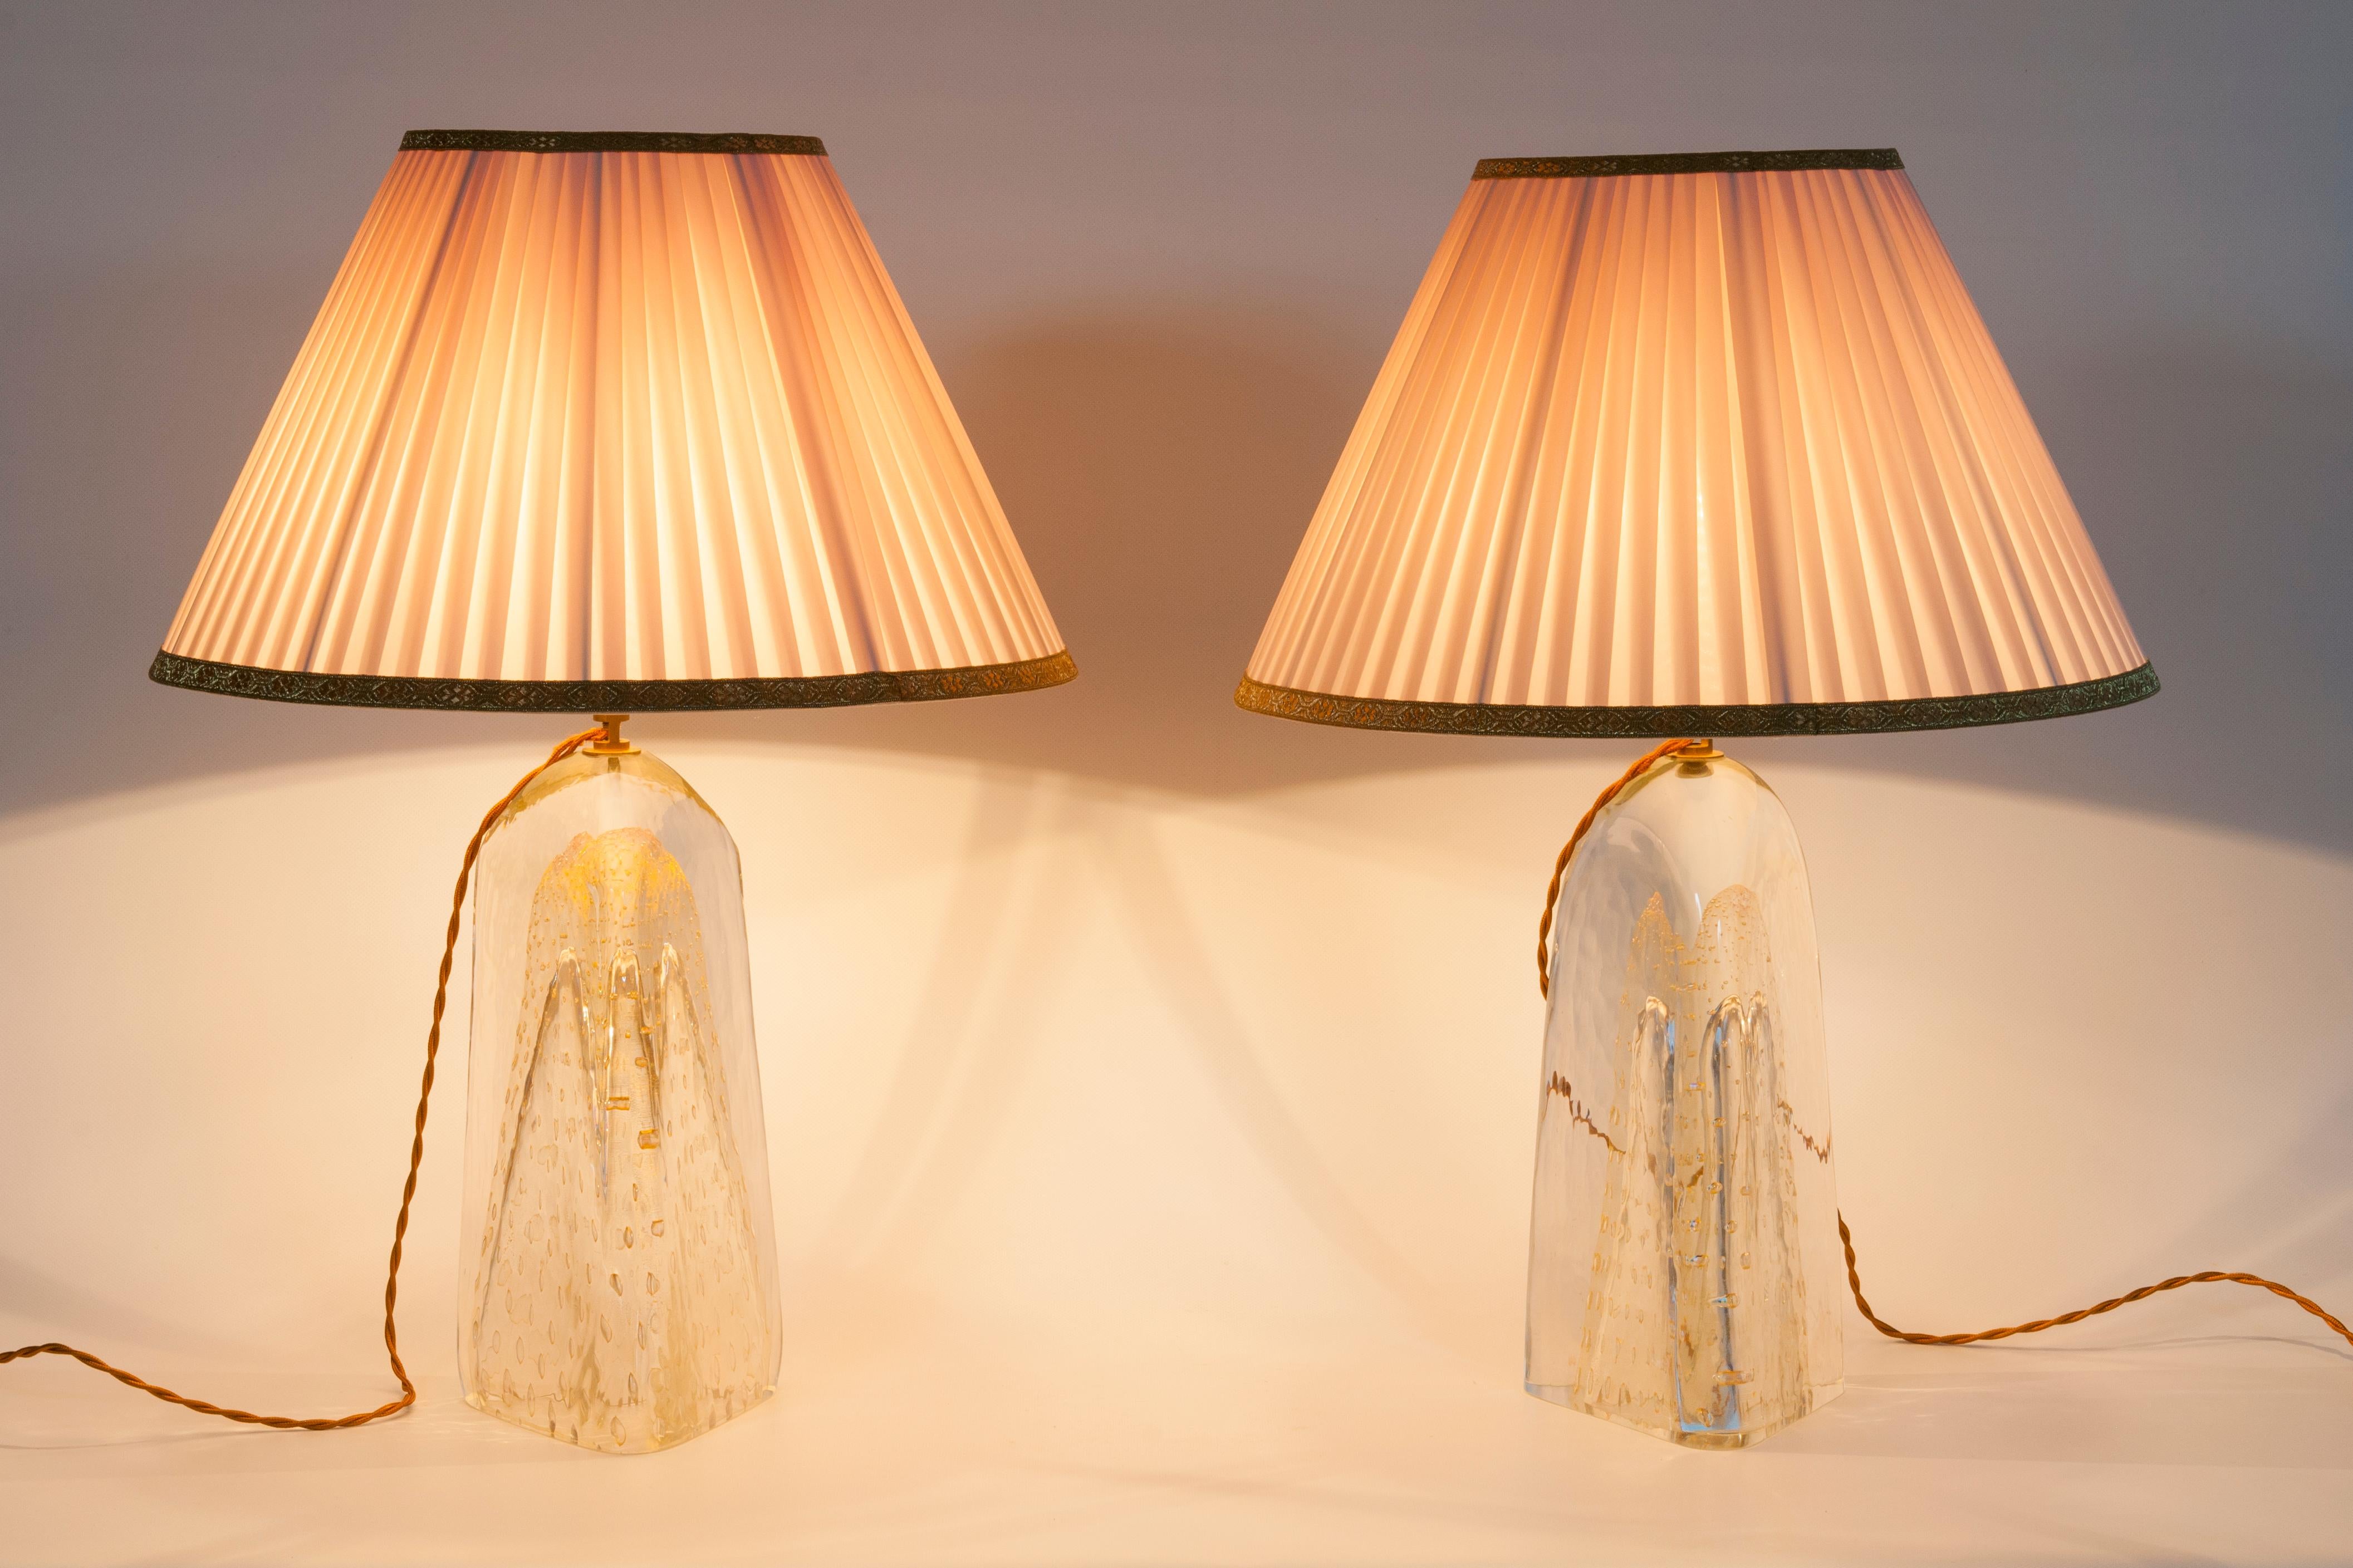 Pair of Murano Glass Triangle-Shaped Lamps with 24-Carat Gold, 1980s For Sale 11